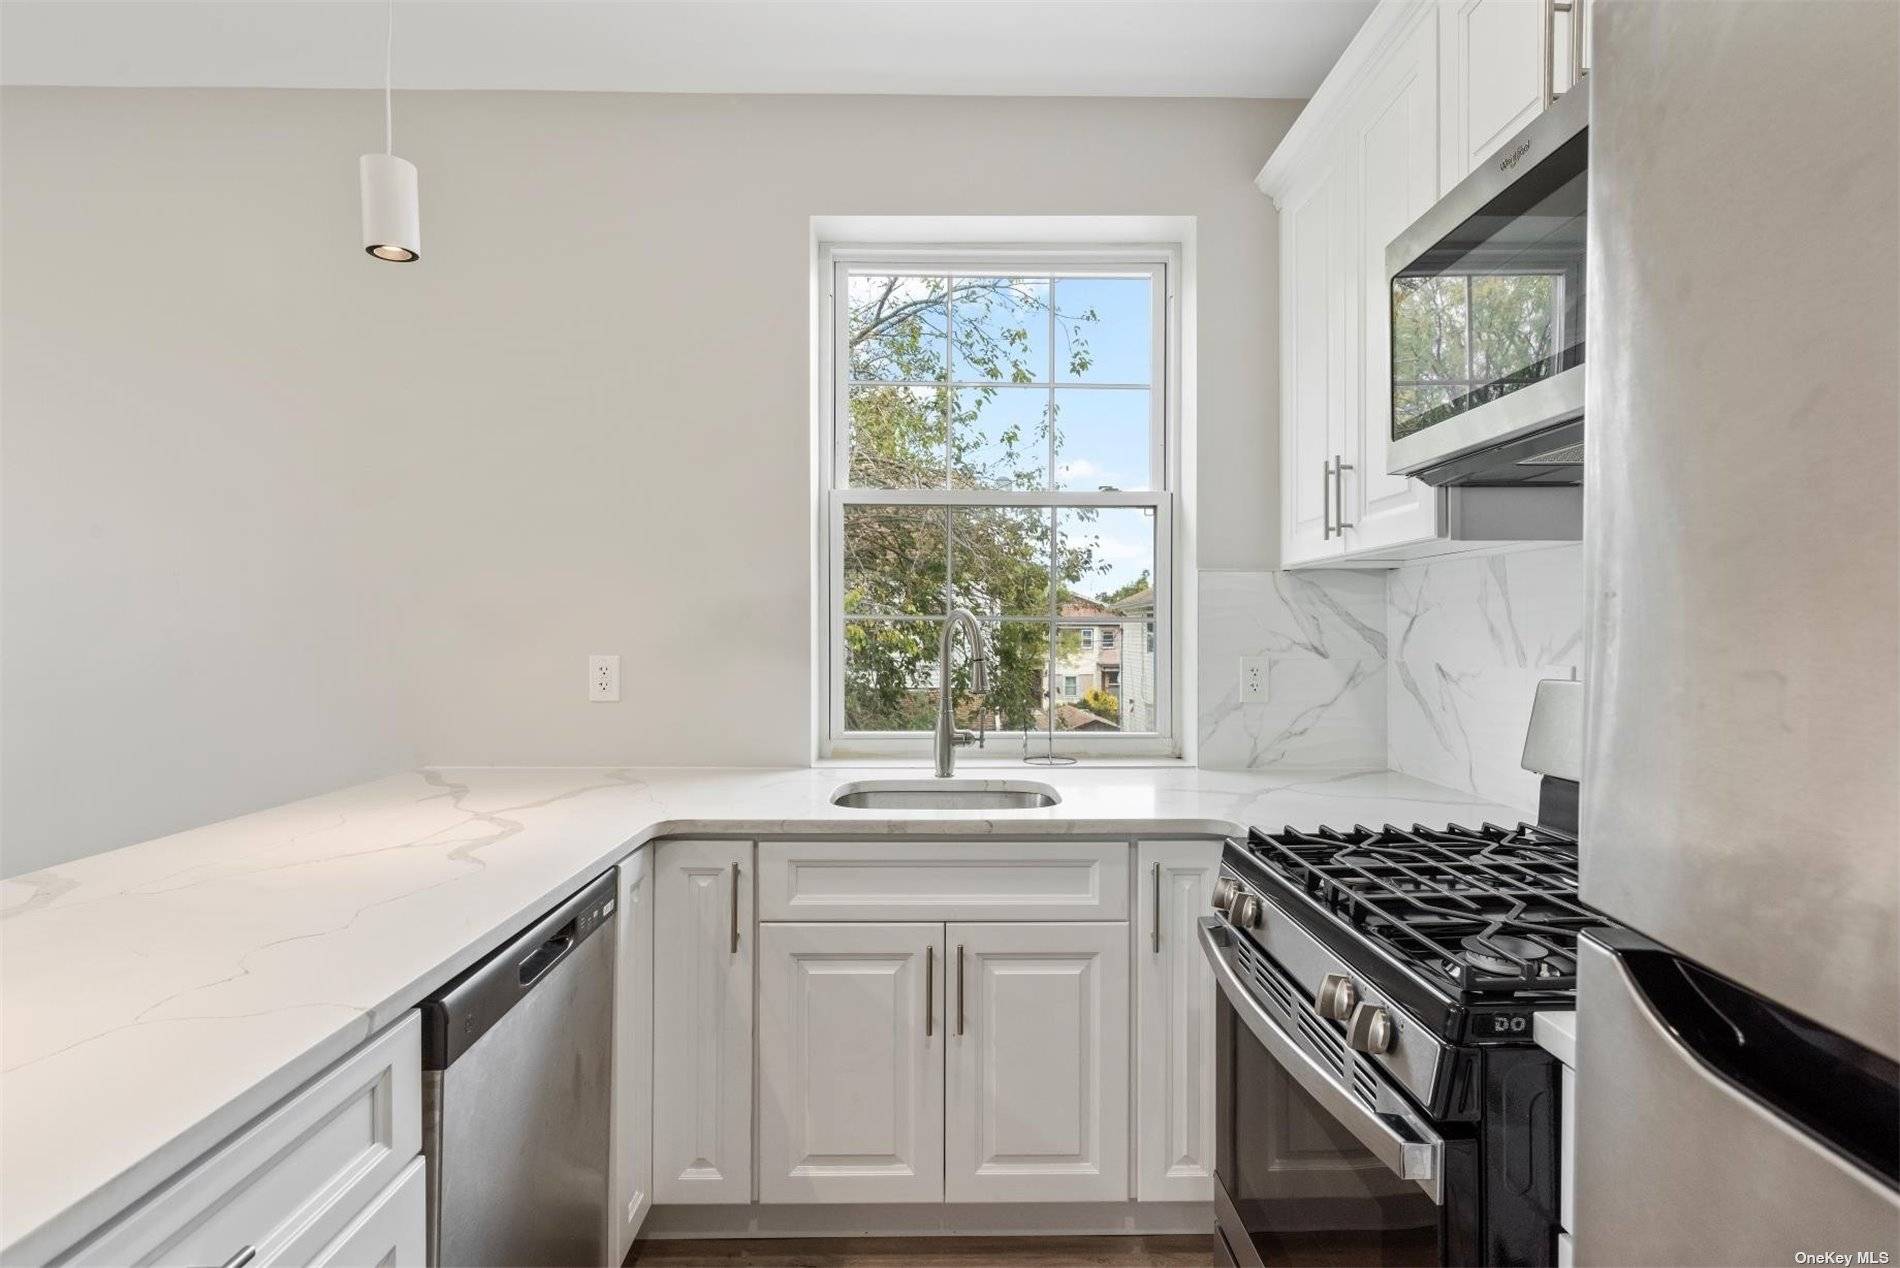 New construction extra ordinary spacious 3 bedrooms apartment, spacious living room and dining room open concept, hardwood floors through out, chef kitchen, quartz counter top, dishwasher, energy saving stainless appliances.